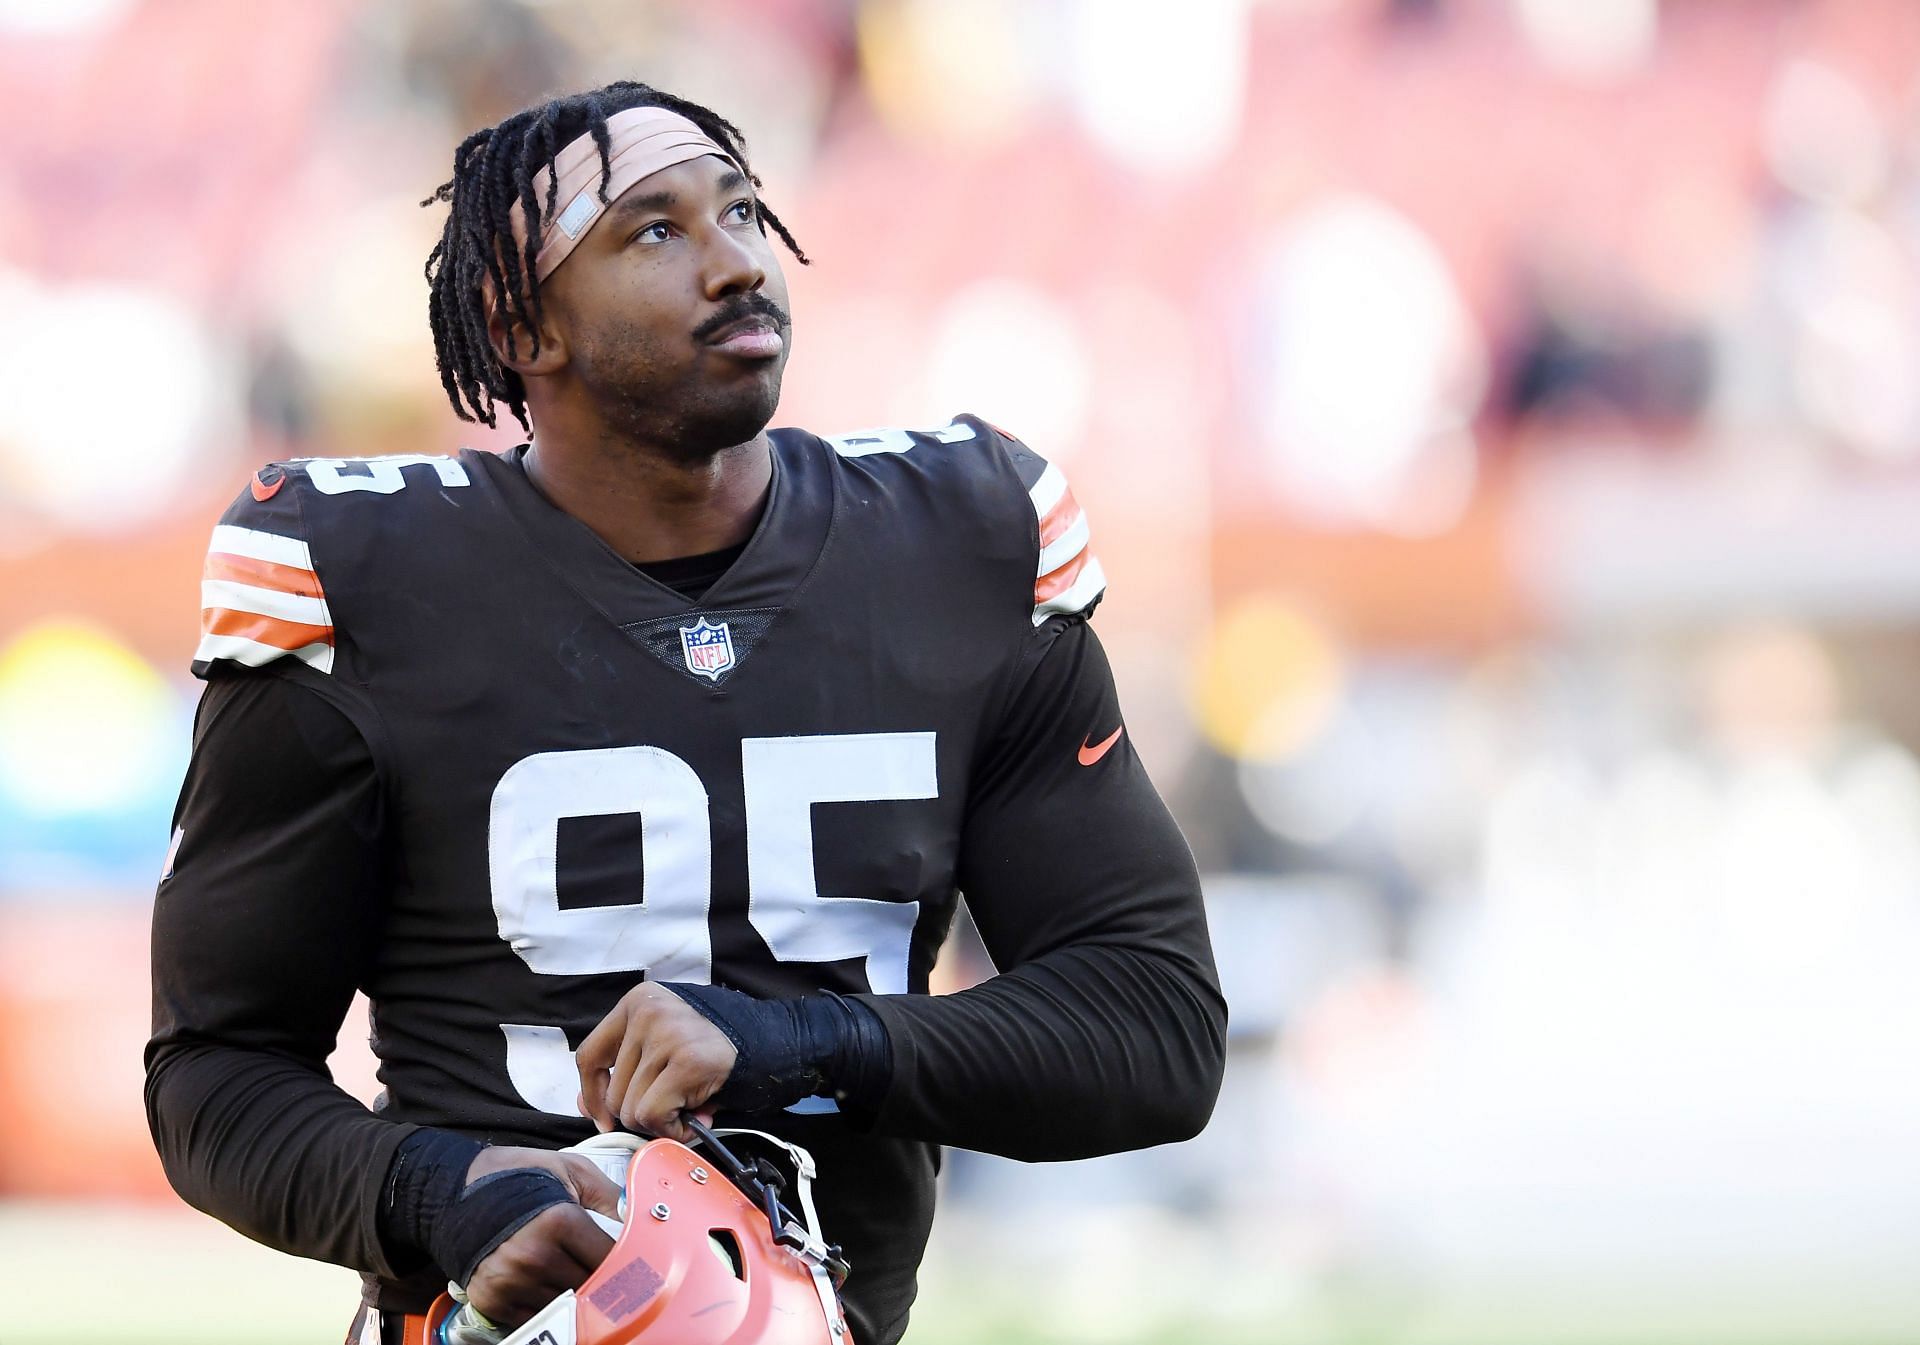 Myles Garrett in action for the Cleveland Browns